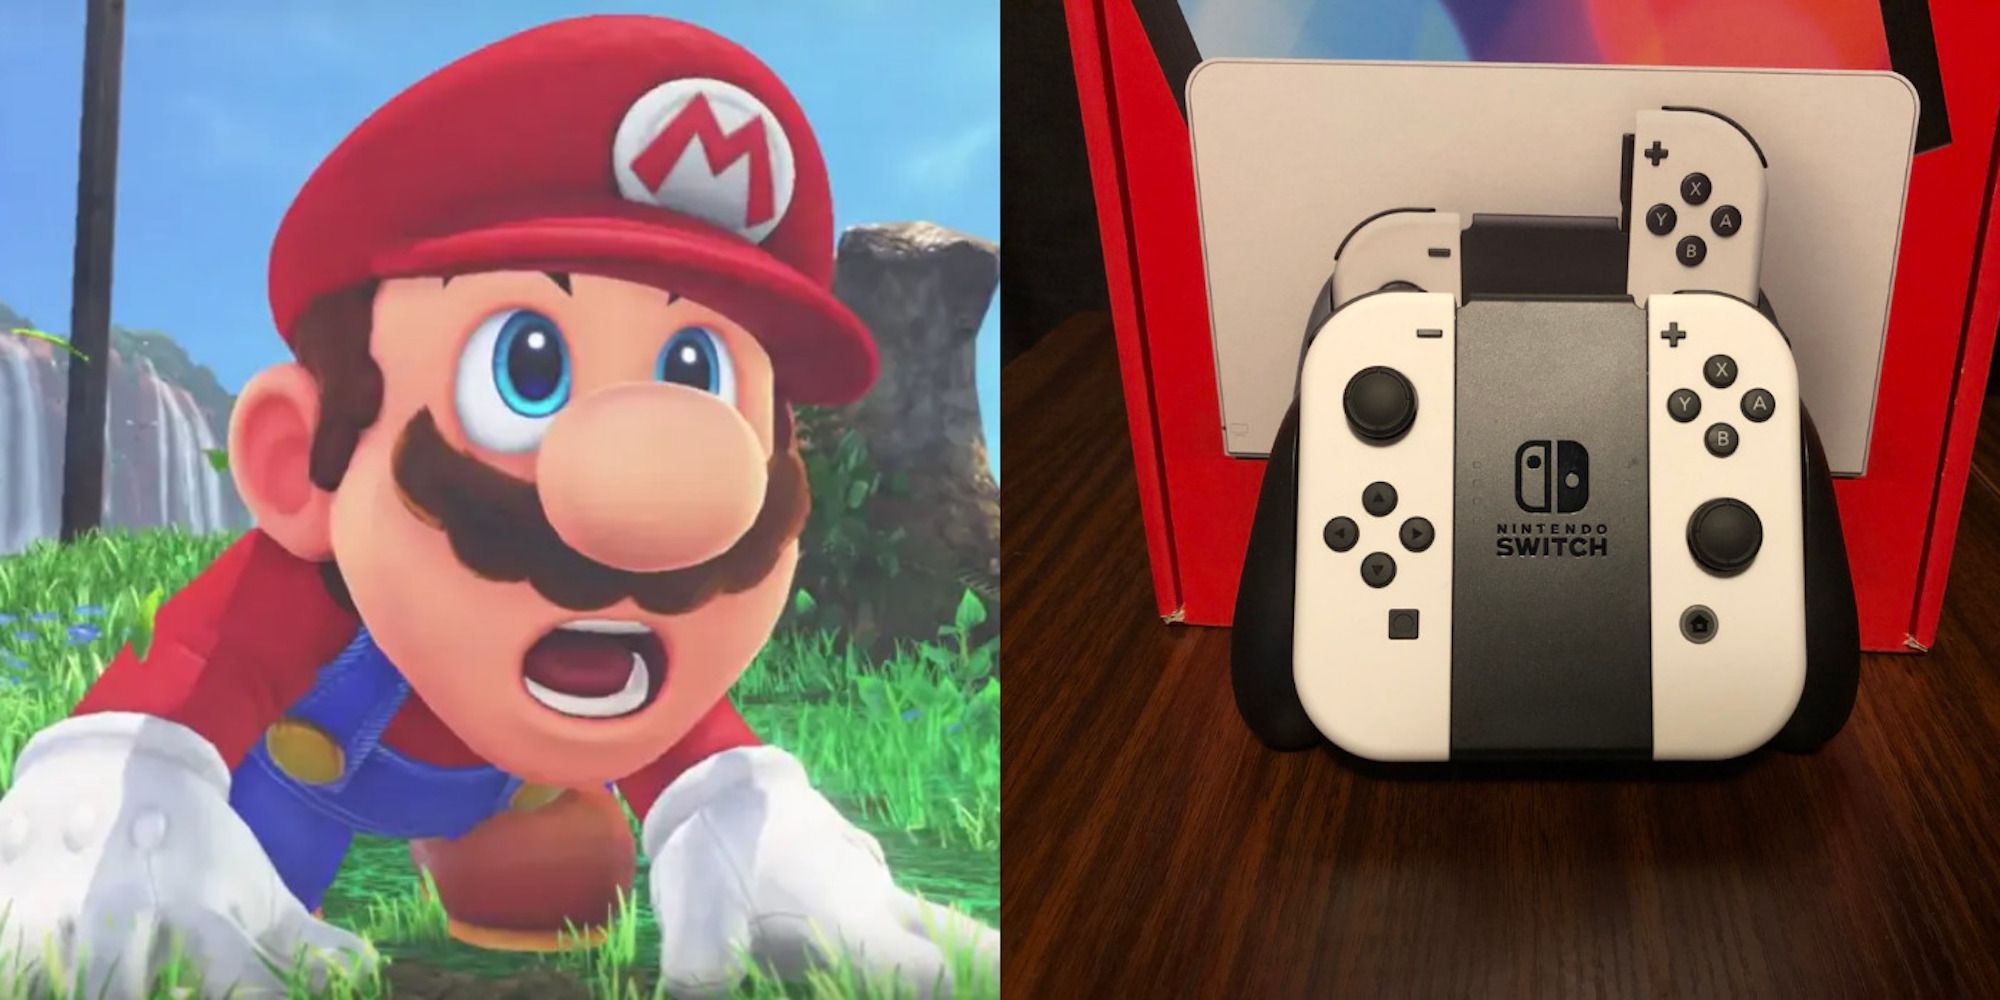 Mario looking at the Switch OLED